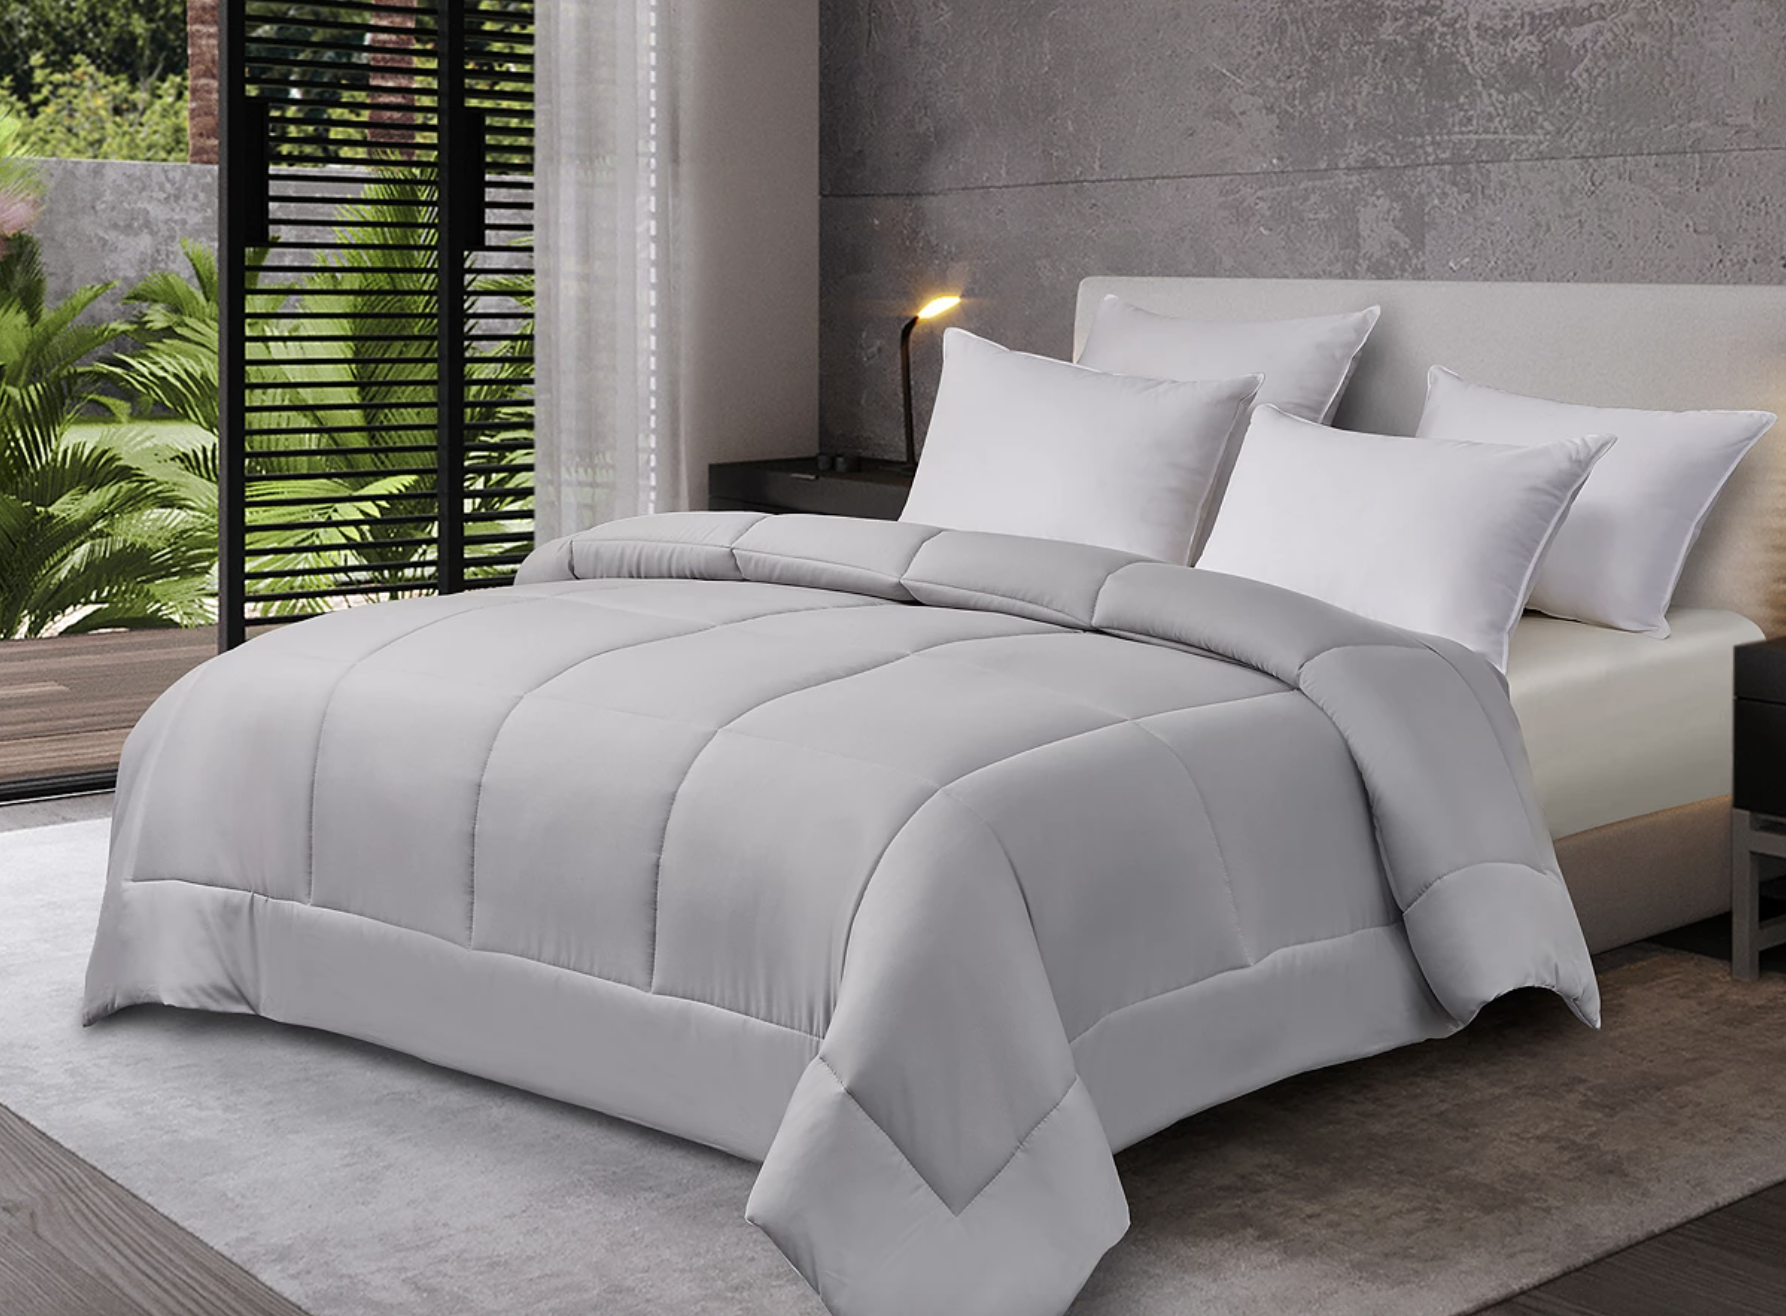 gray comforter on a bed